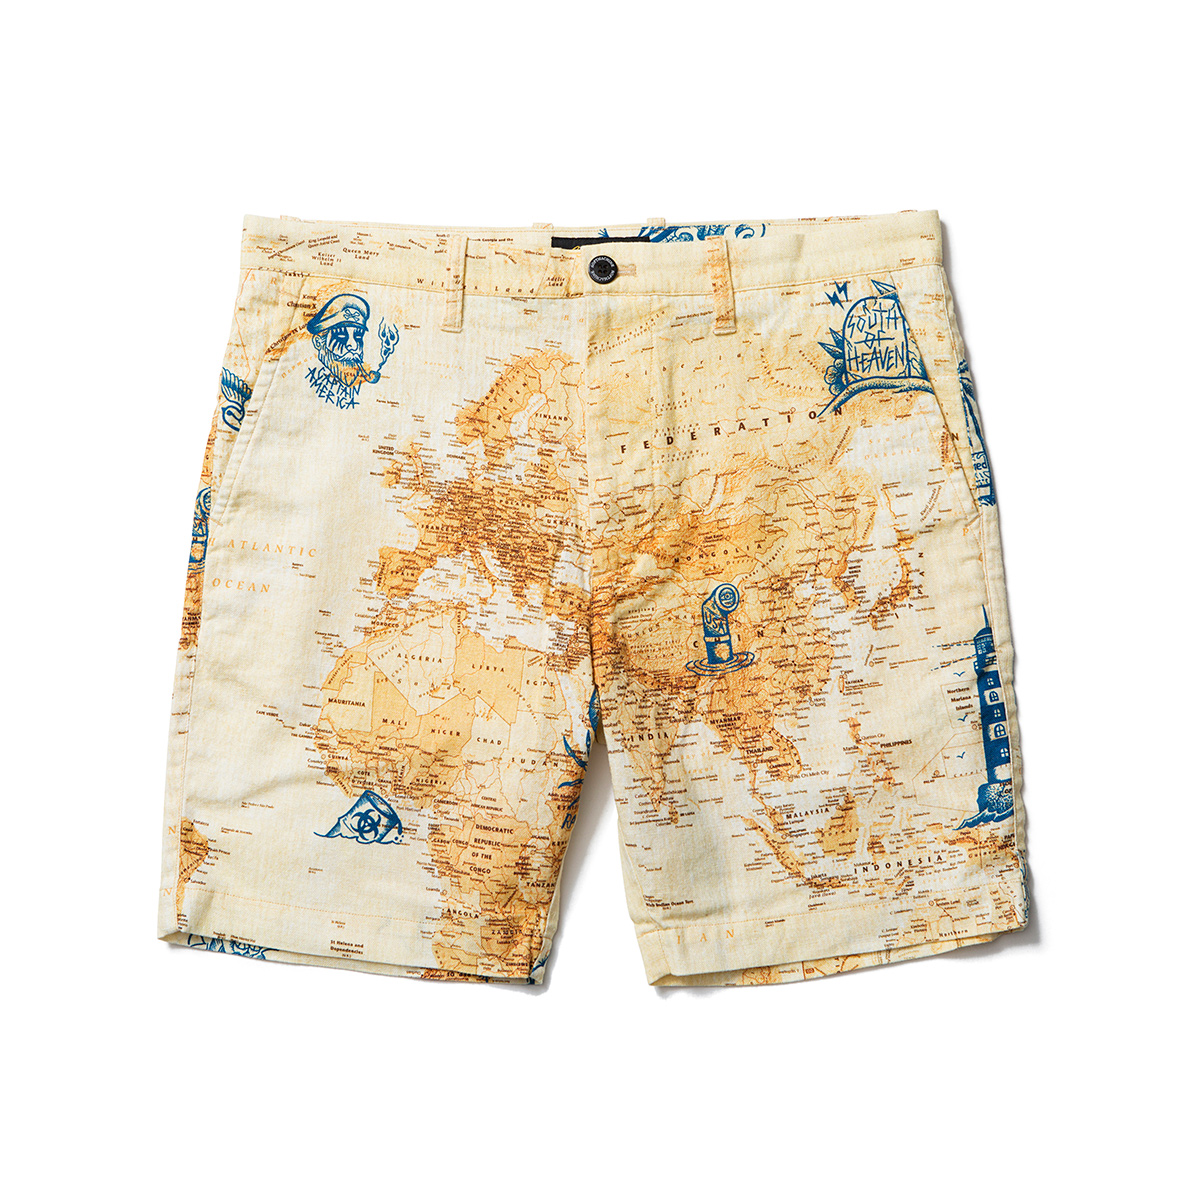 DISCOVERY SHORTS